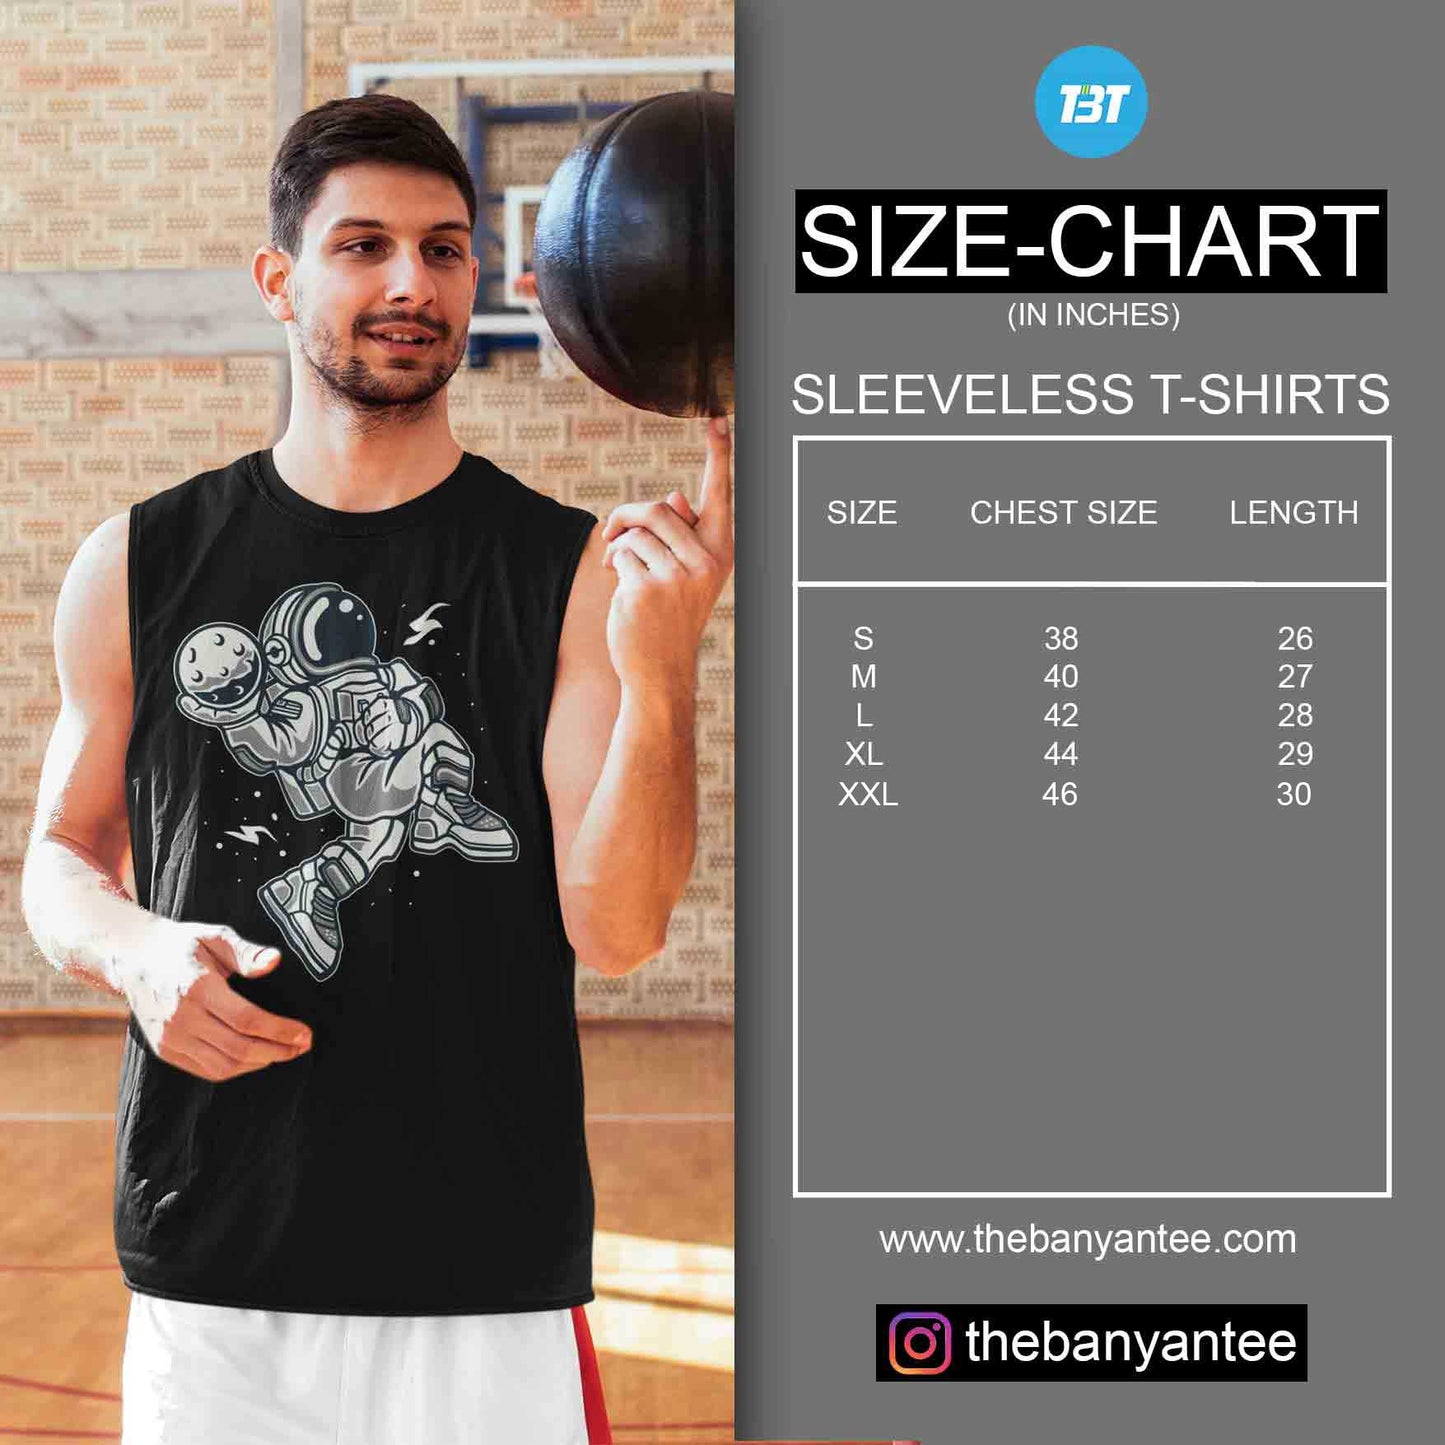 the banyan tee all-over printed sleeveless t shirt size chart